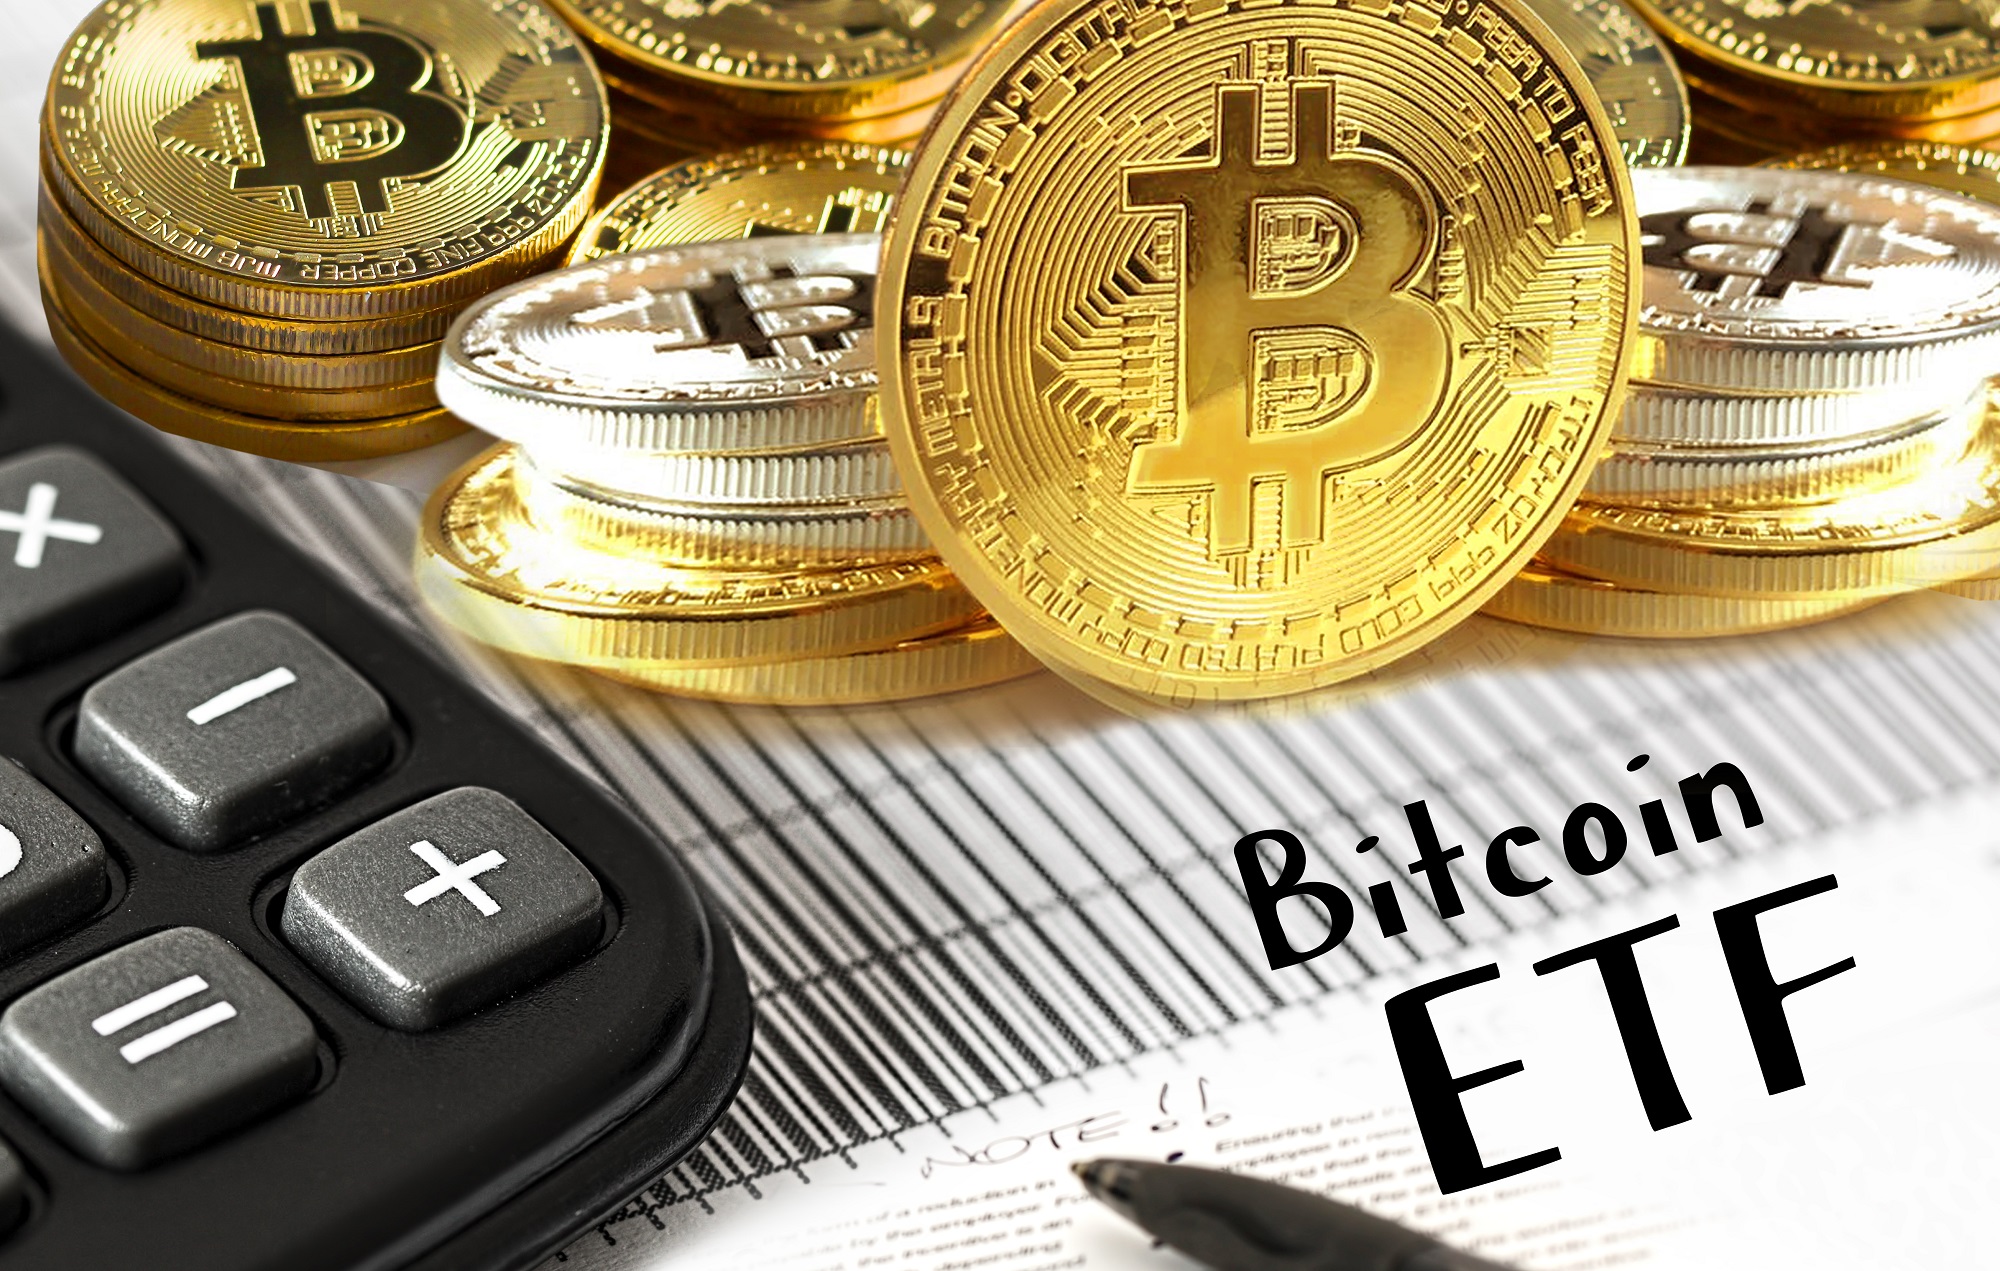 Bitcoin ETF  What Is It Exactly and Why Would It Boost Cryptocurrencies?